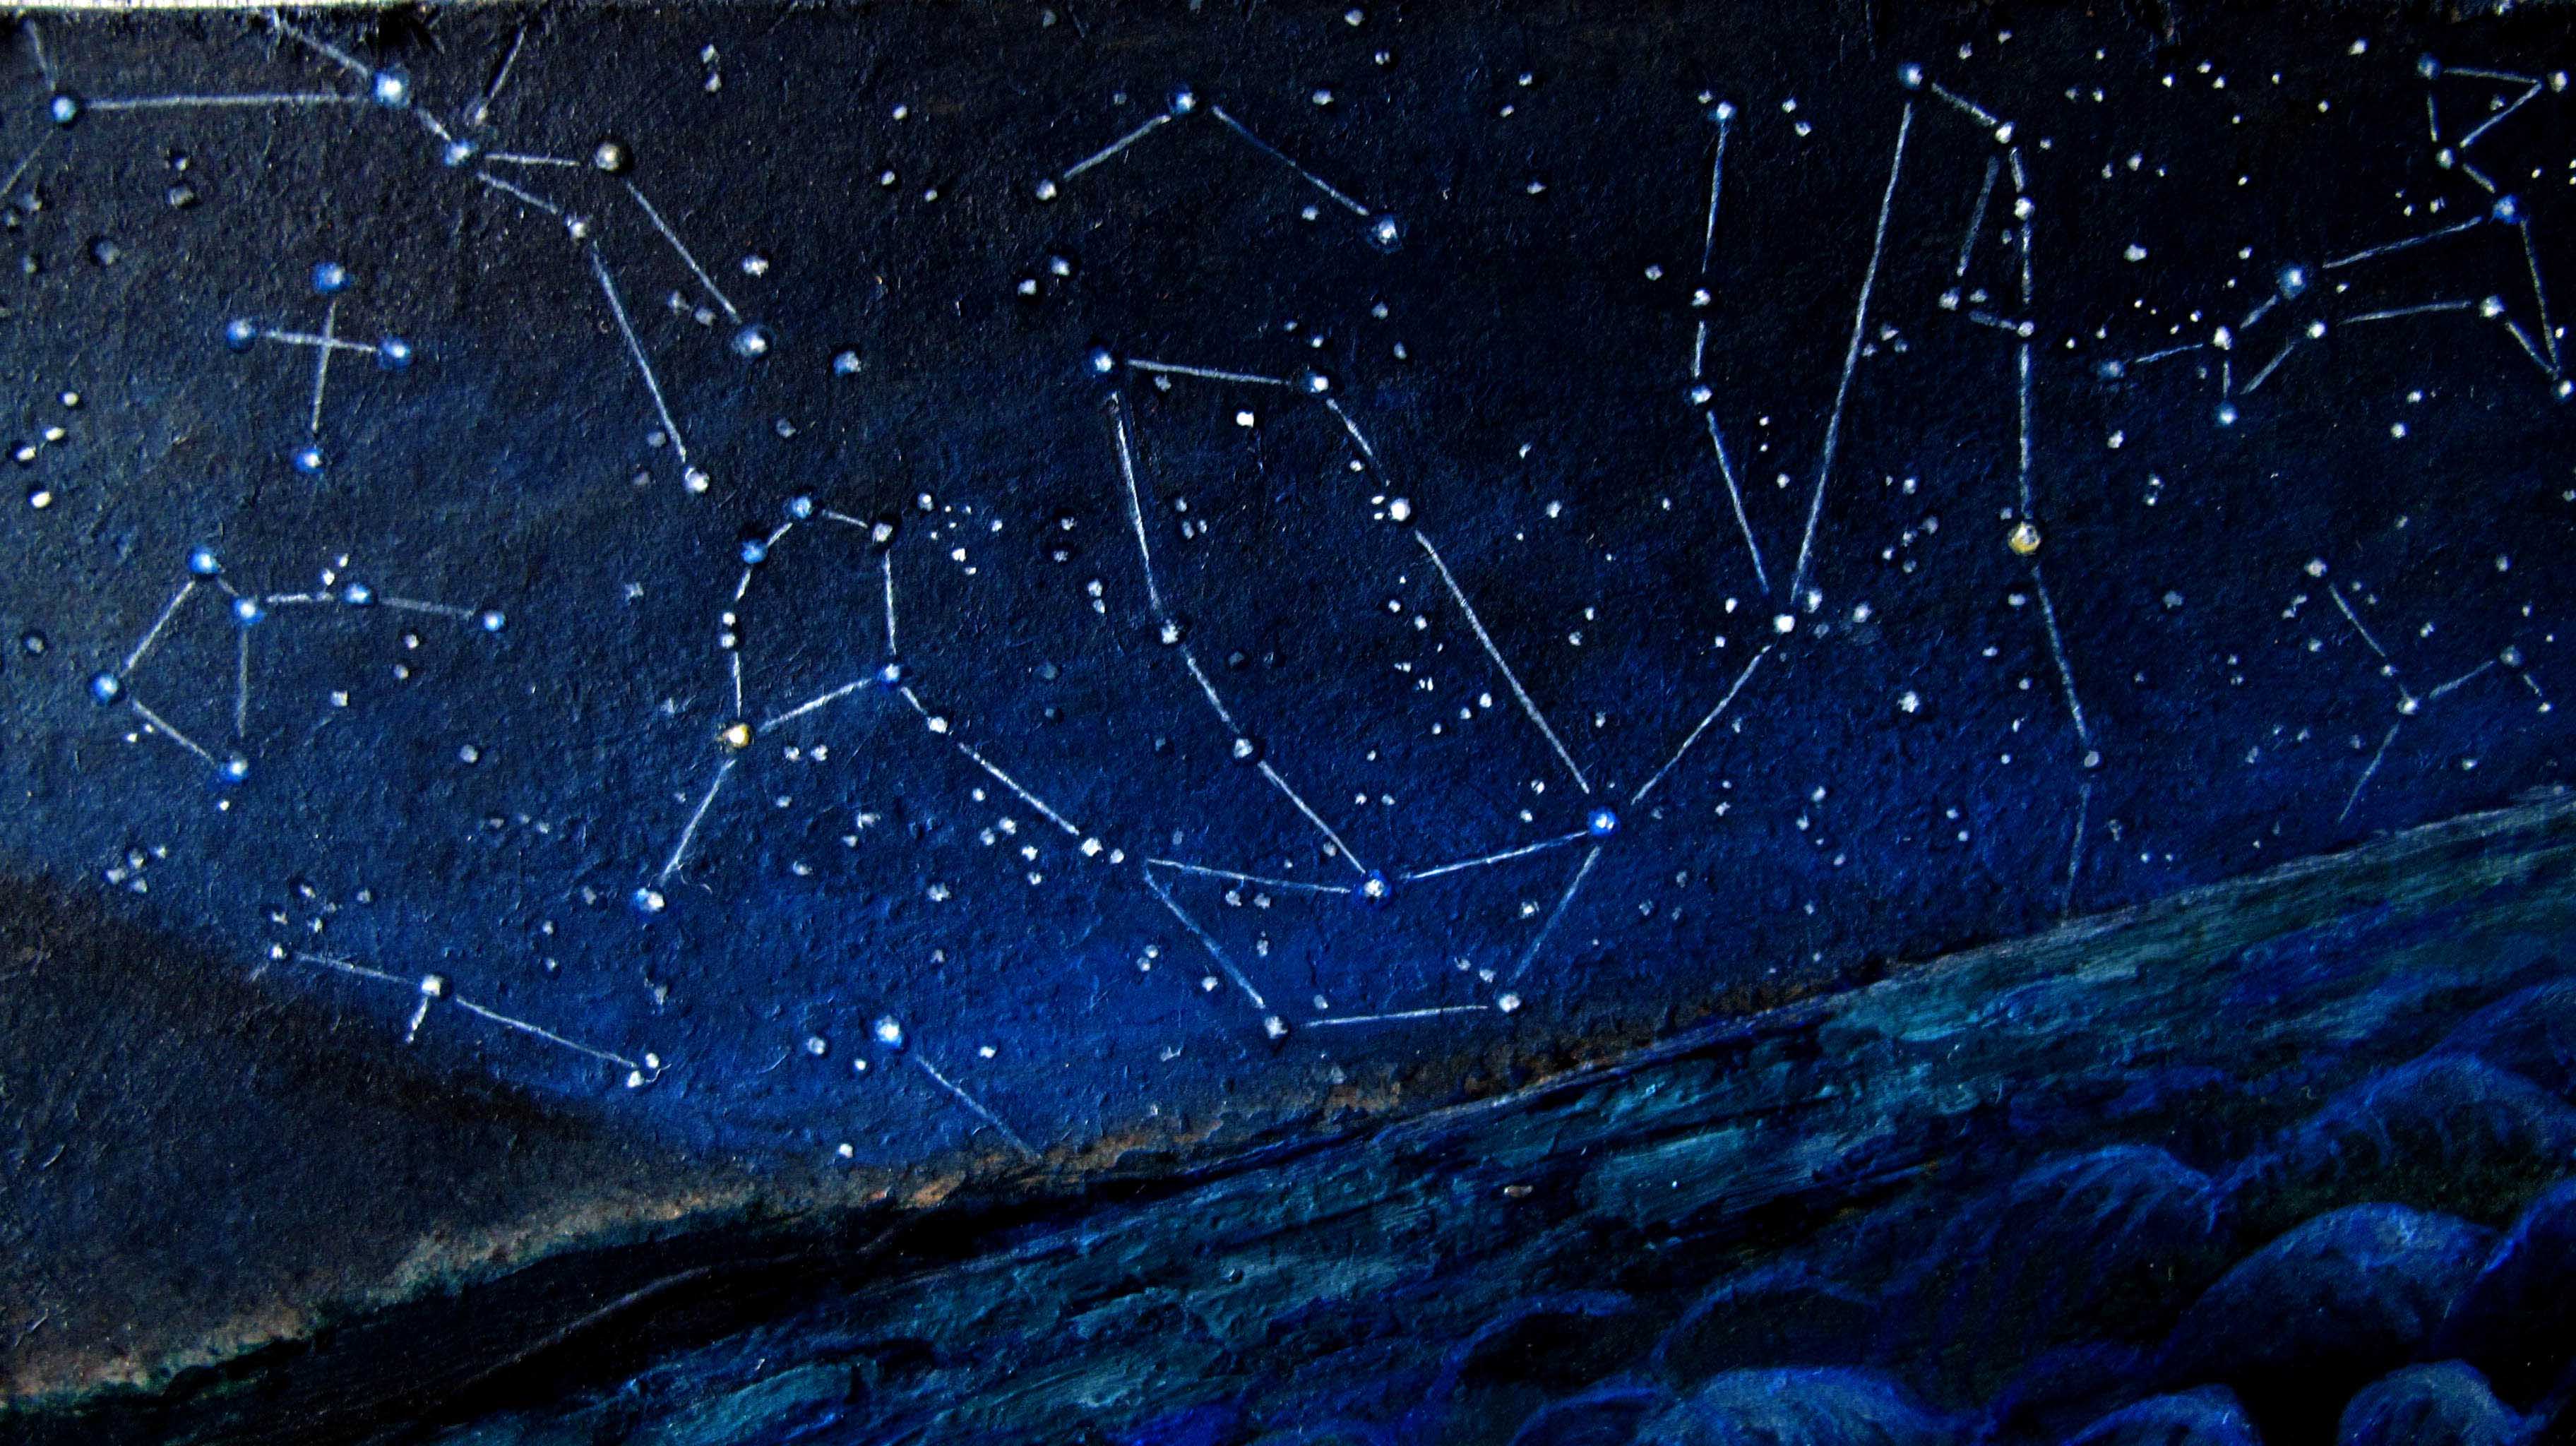 These Backg Round Constellations Are Easily Overlooked But If You Look